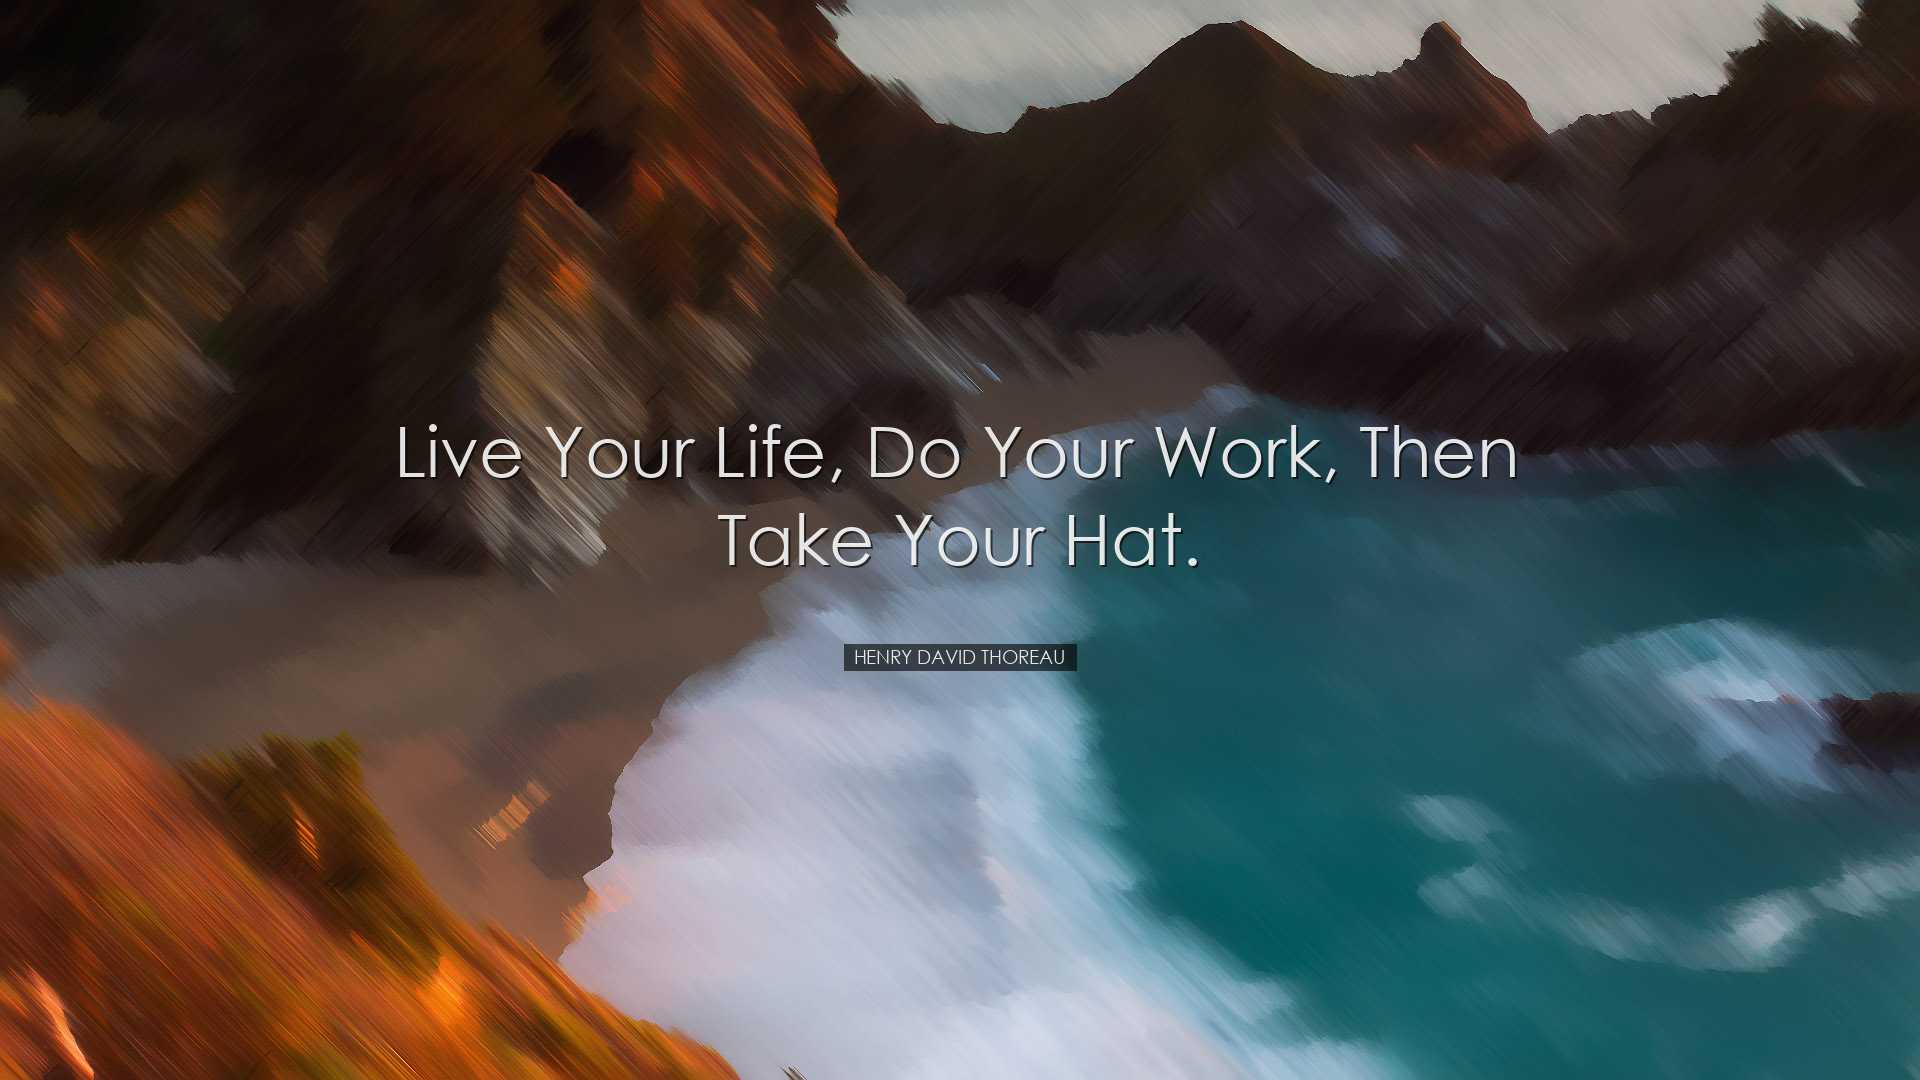 Live your life, do your work, then take your hat. - Henry David Th